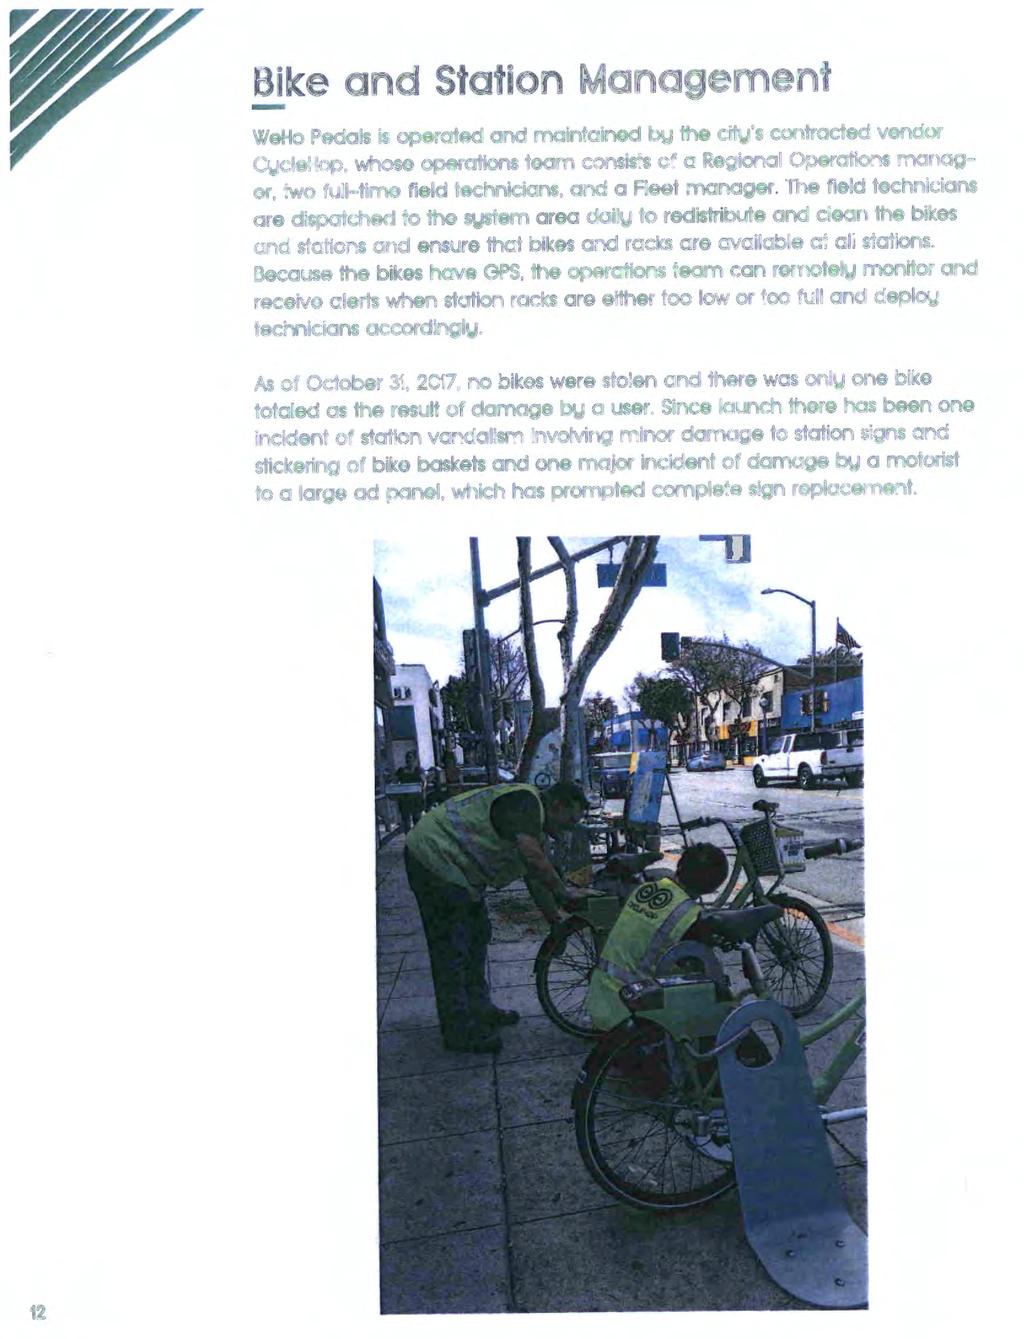 Bike and Station Management -WeHo Pedals is operated and maintained by the city's contracted vendor CycleHop.